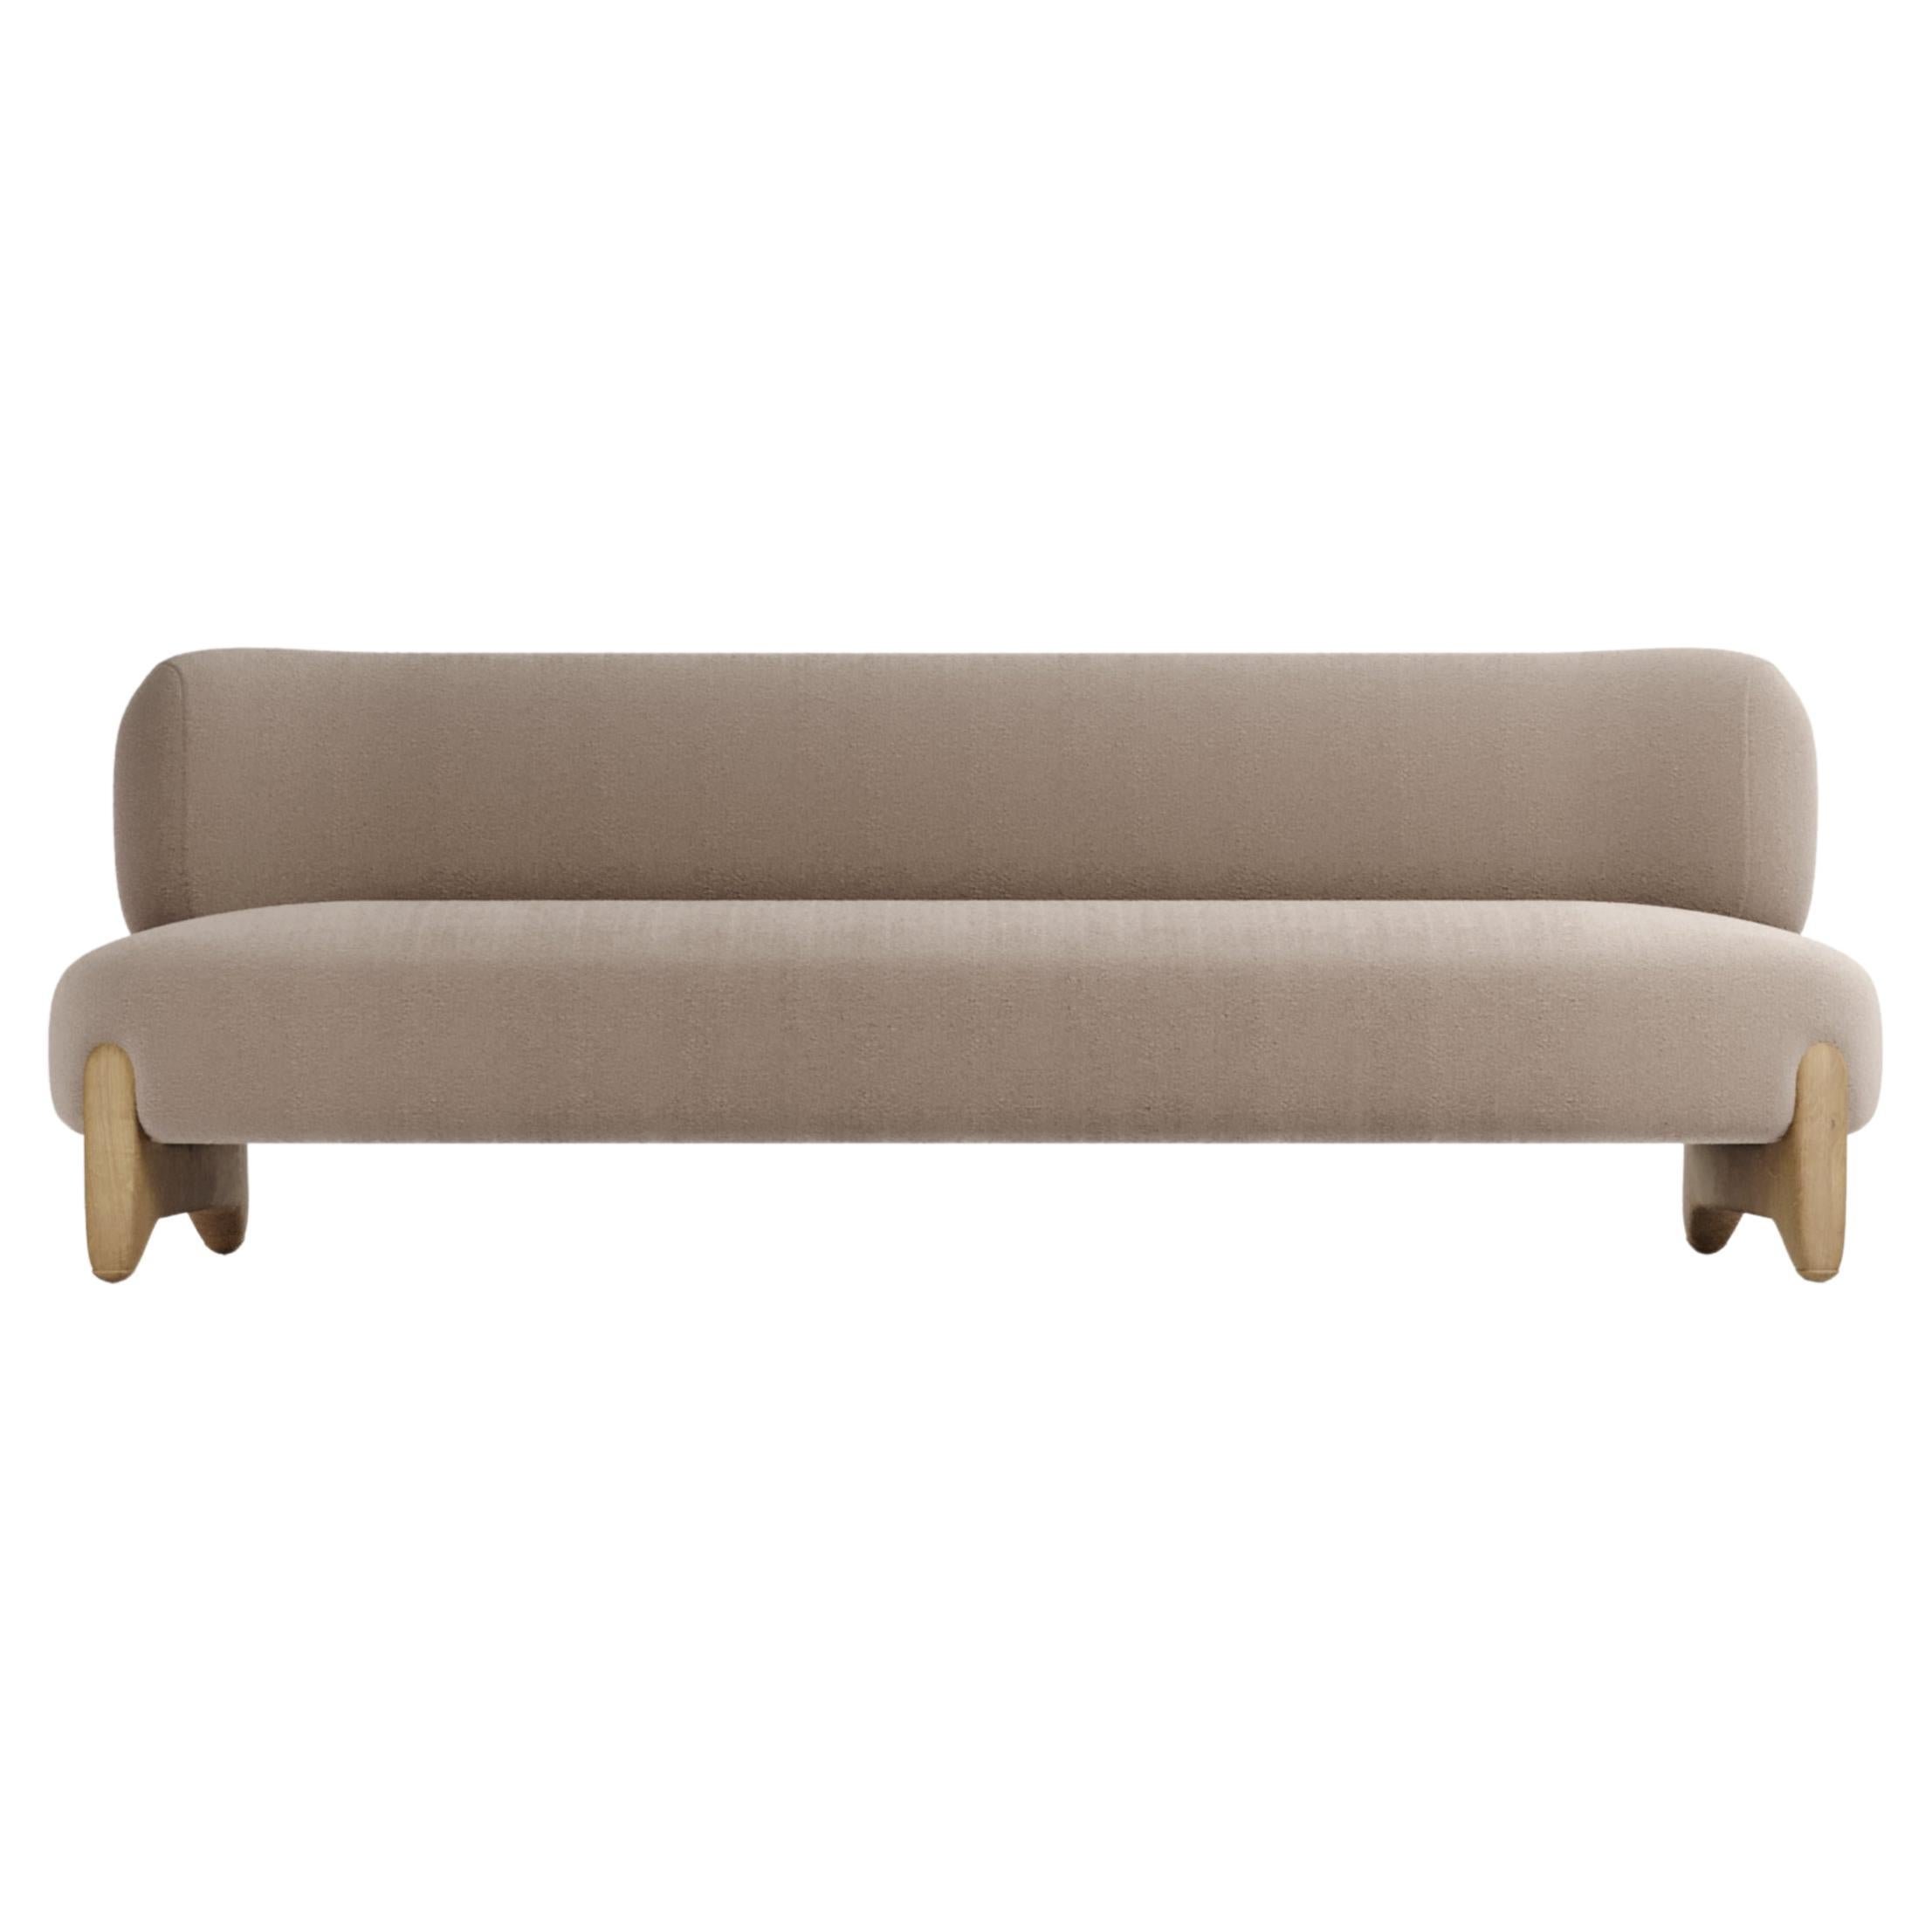 Contemporary Modern Tobo Sofa in Fabric & Oak Wood by Collector Studio